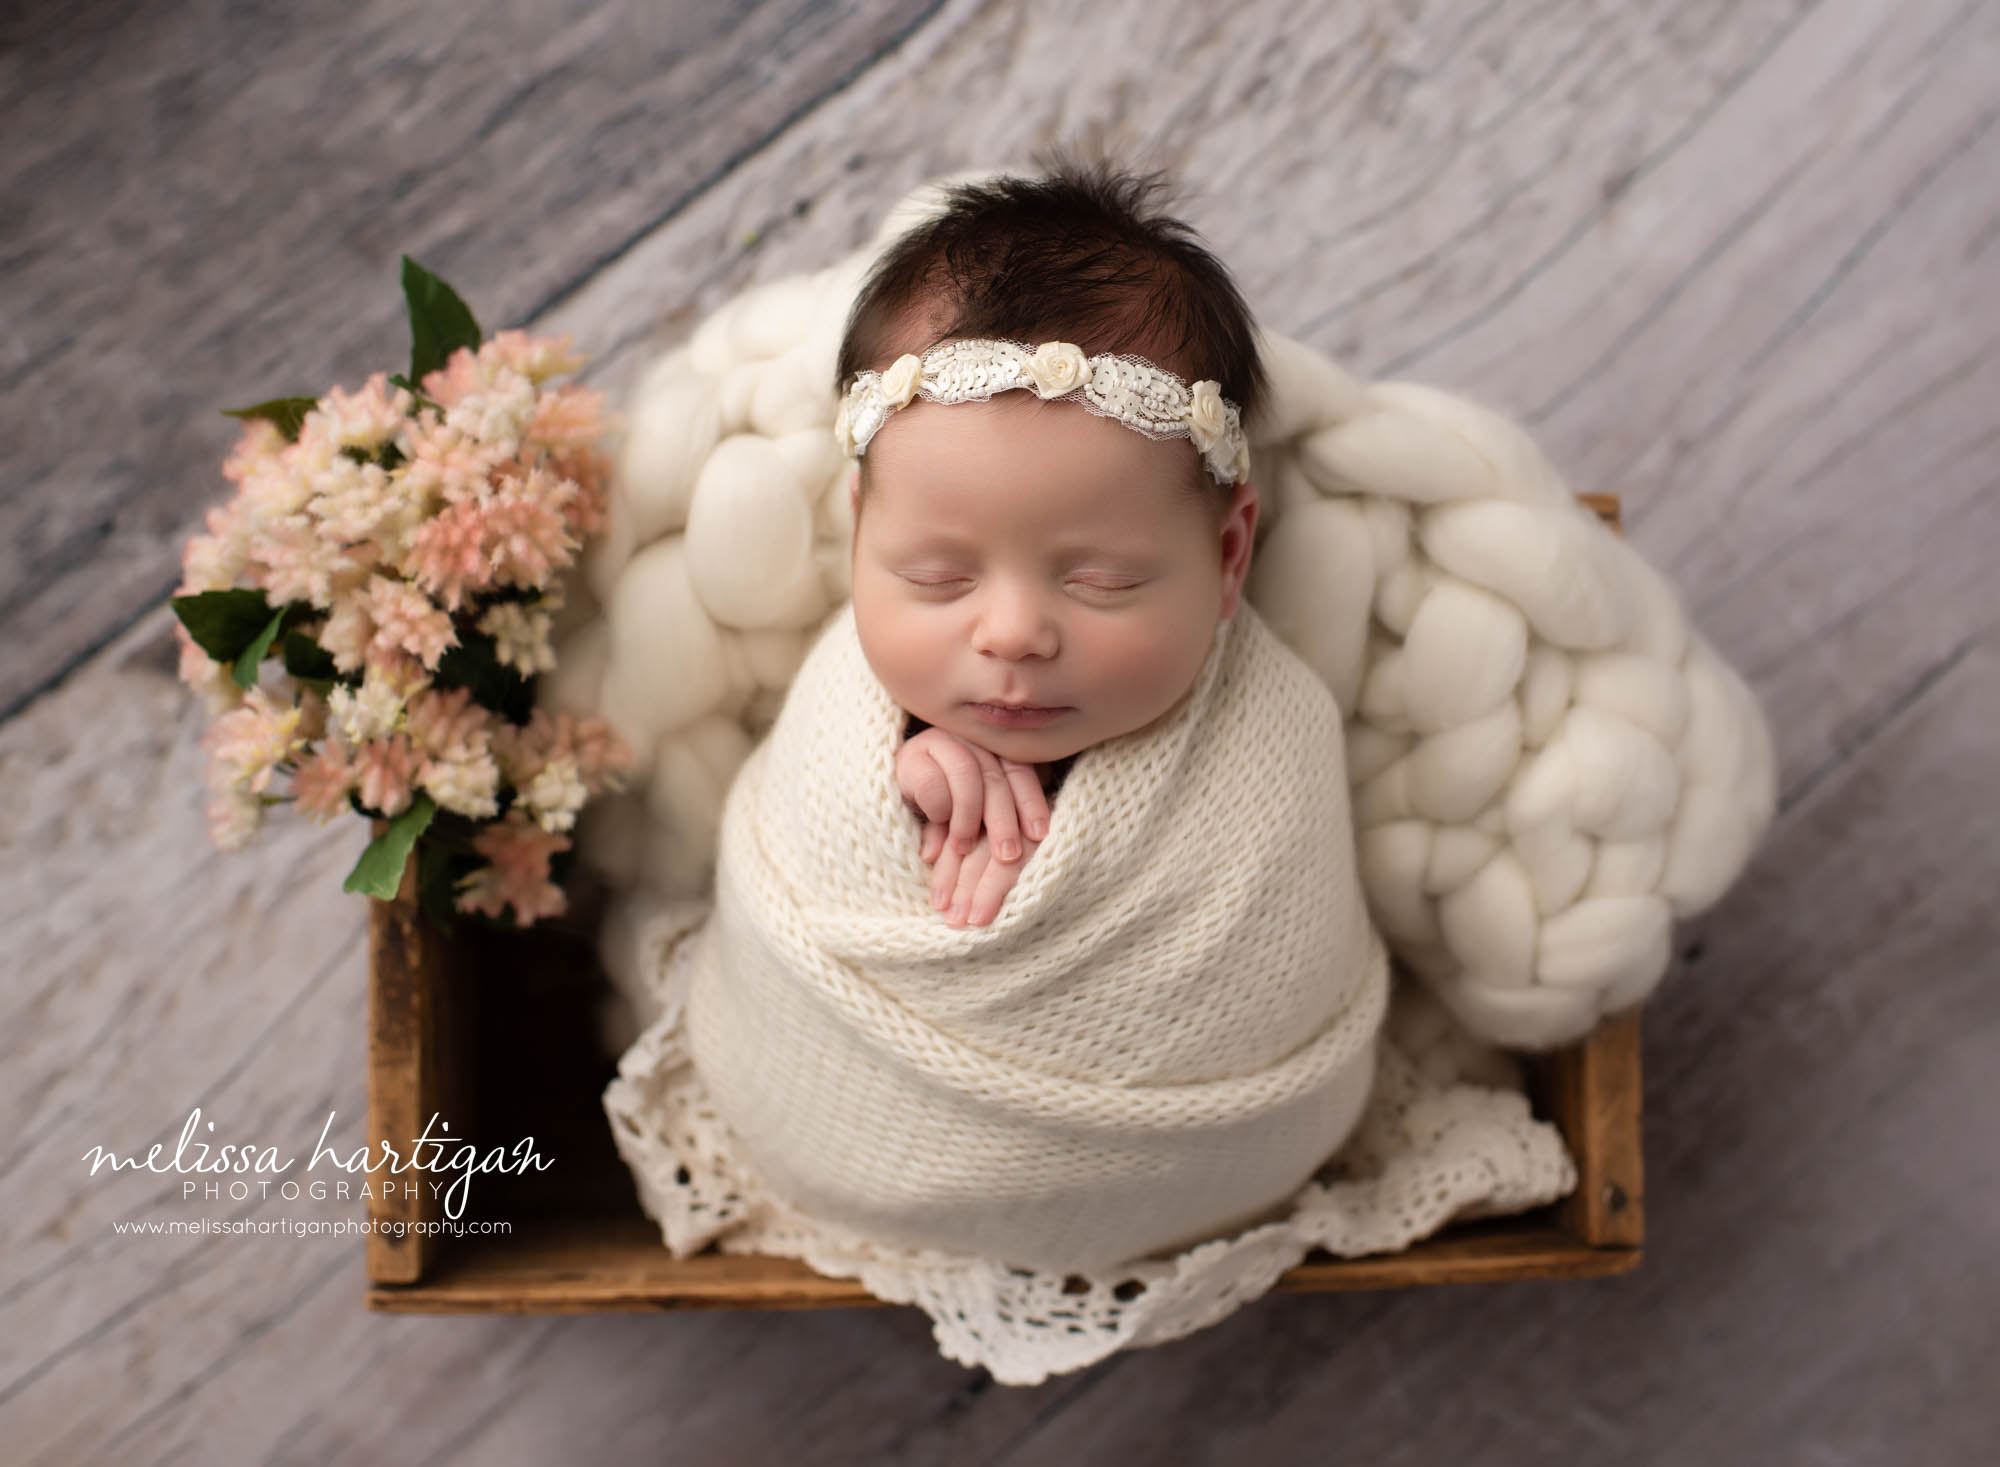 Newborn baby girl wrapped in cream wrap in wooden box with flower elements